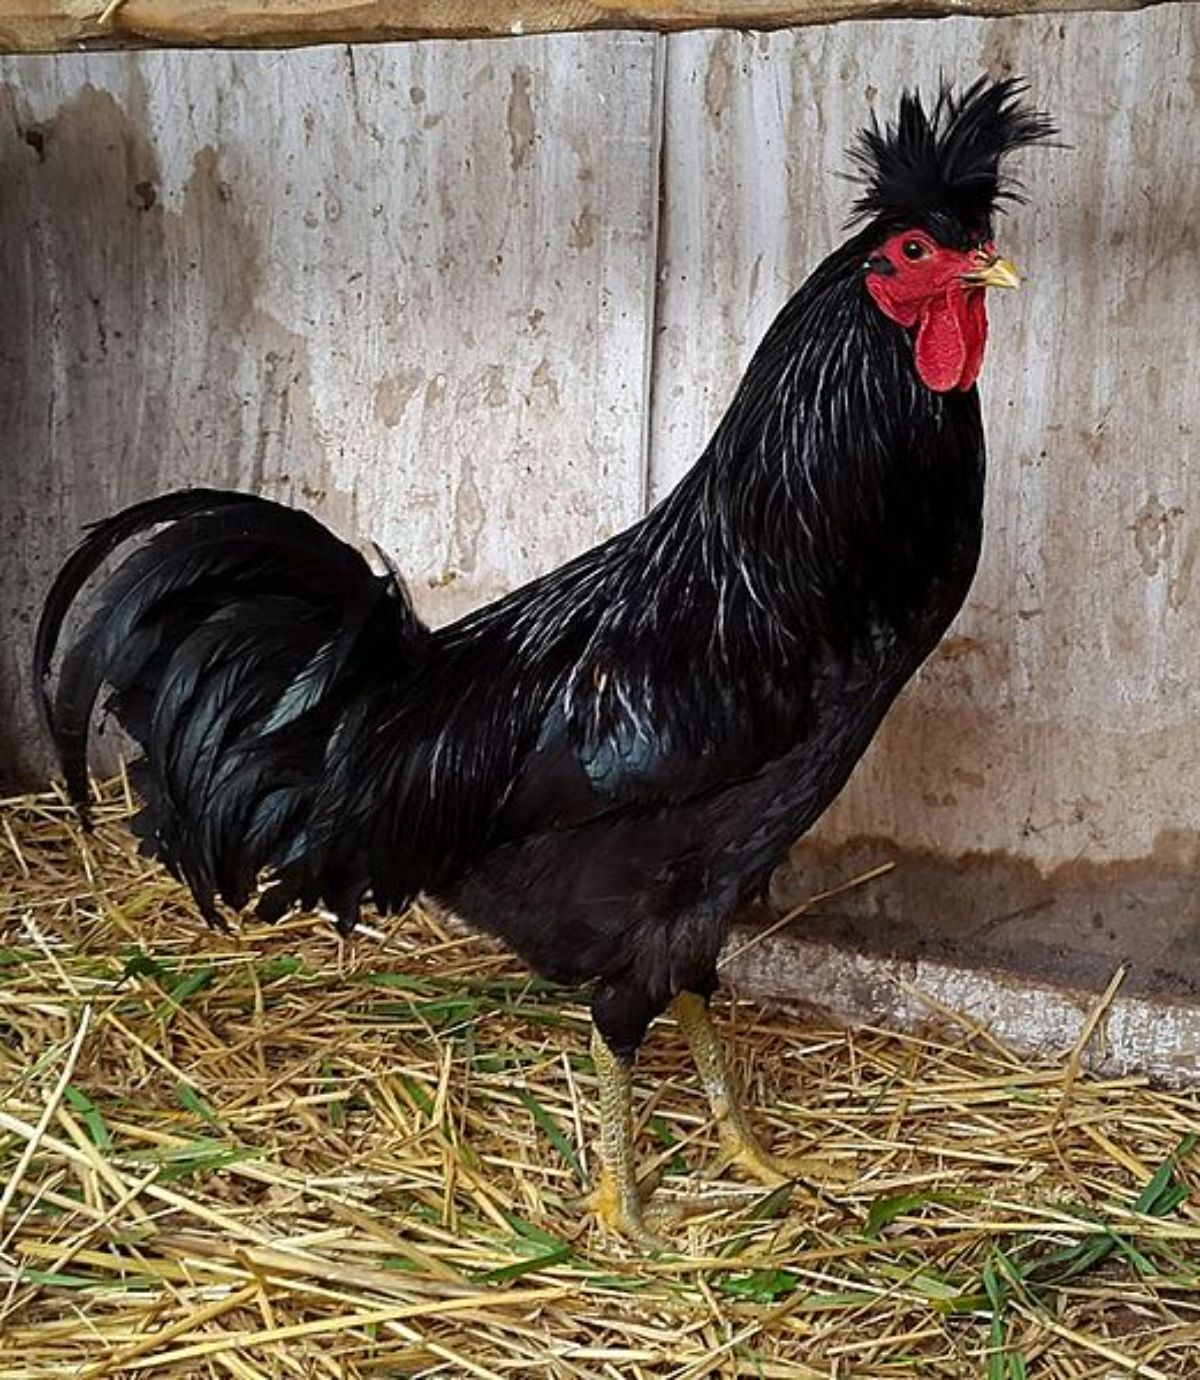 An adorable Kosova Longcrower rooster standing near a chicken coop.